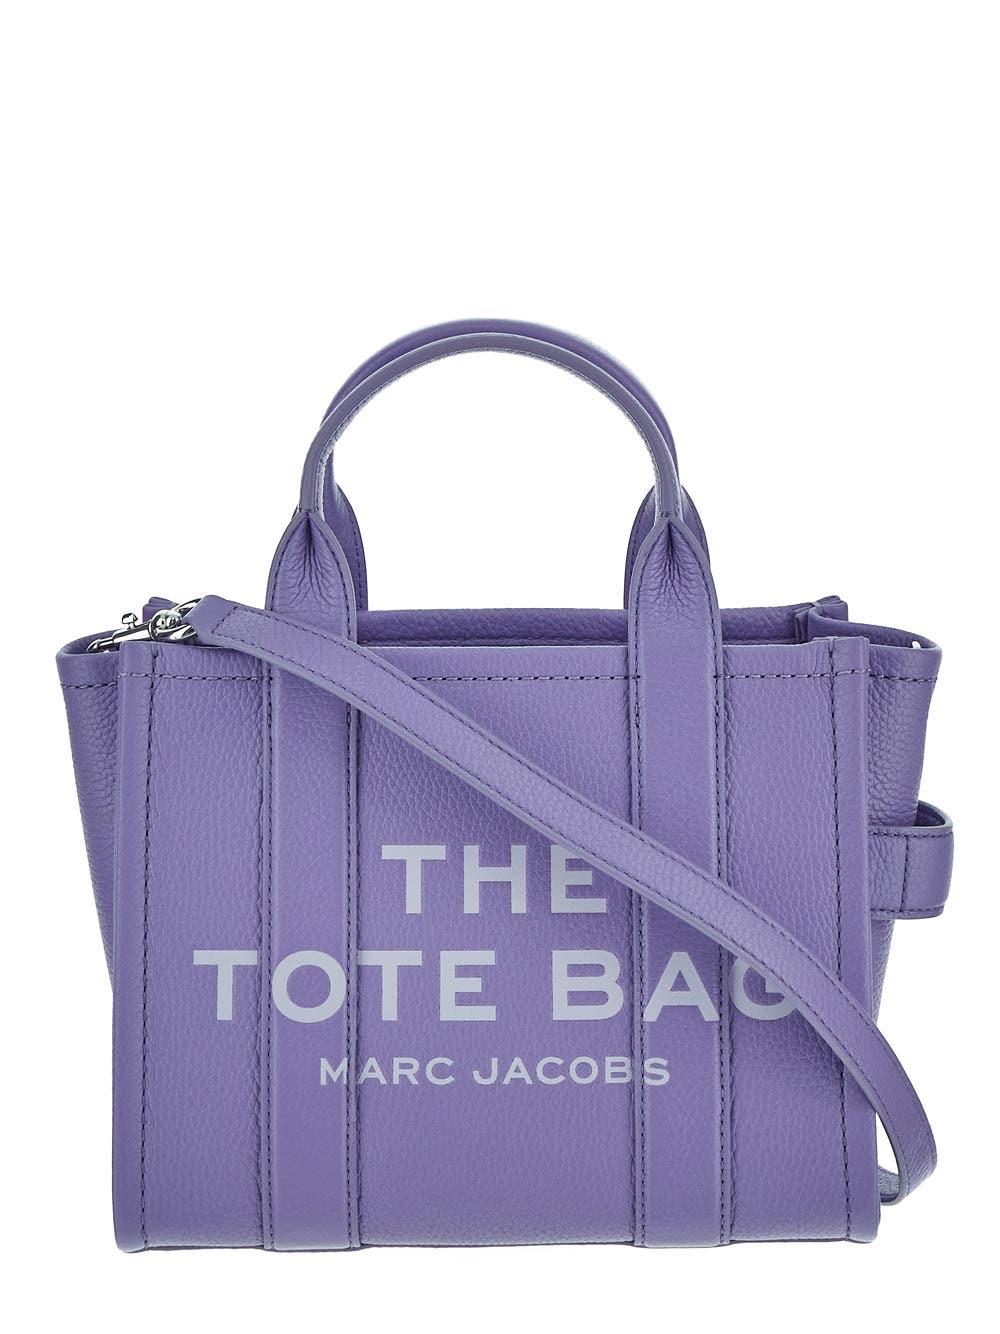 Marc Jacobs Tote Bag in Purple | Lyst